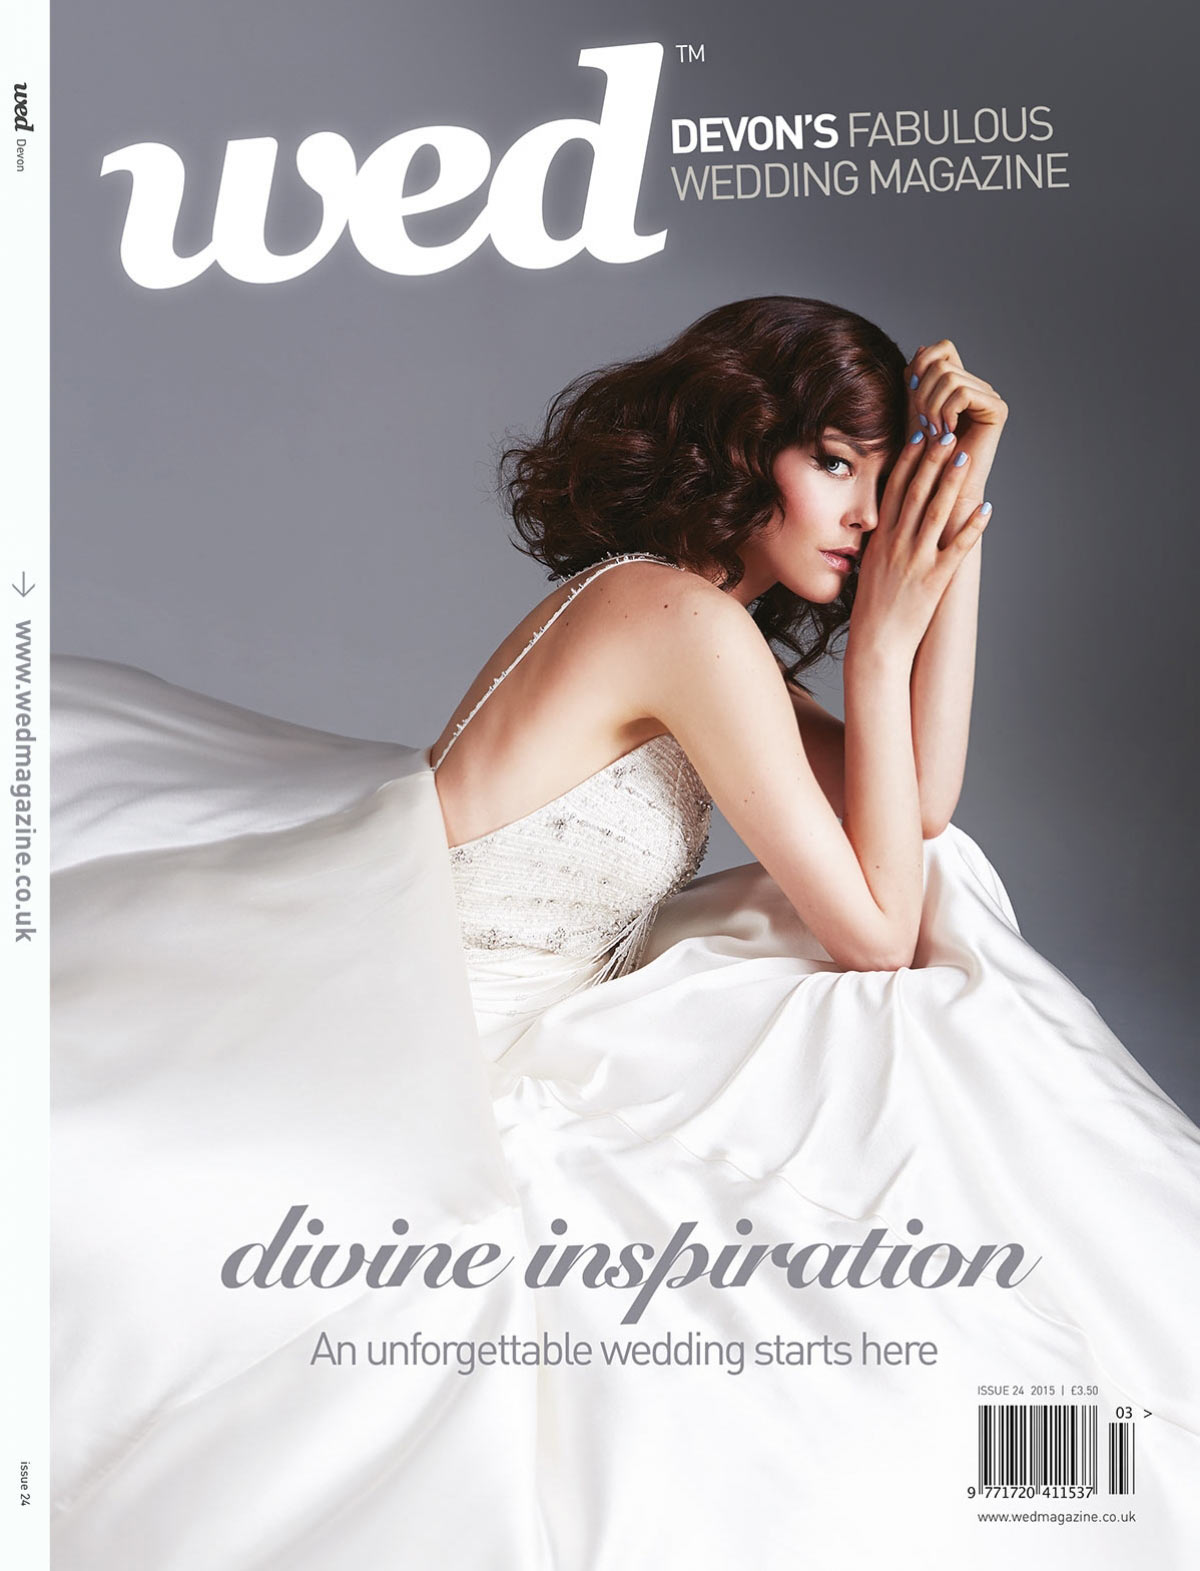 Devon Wed out now!